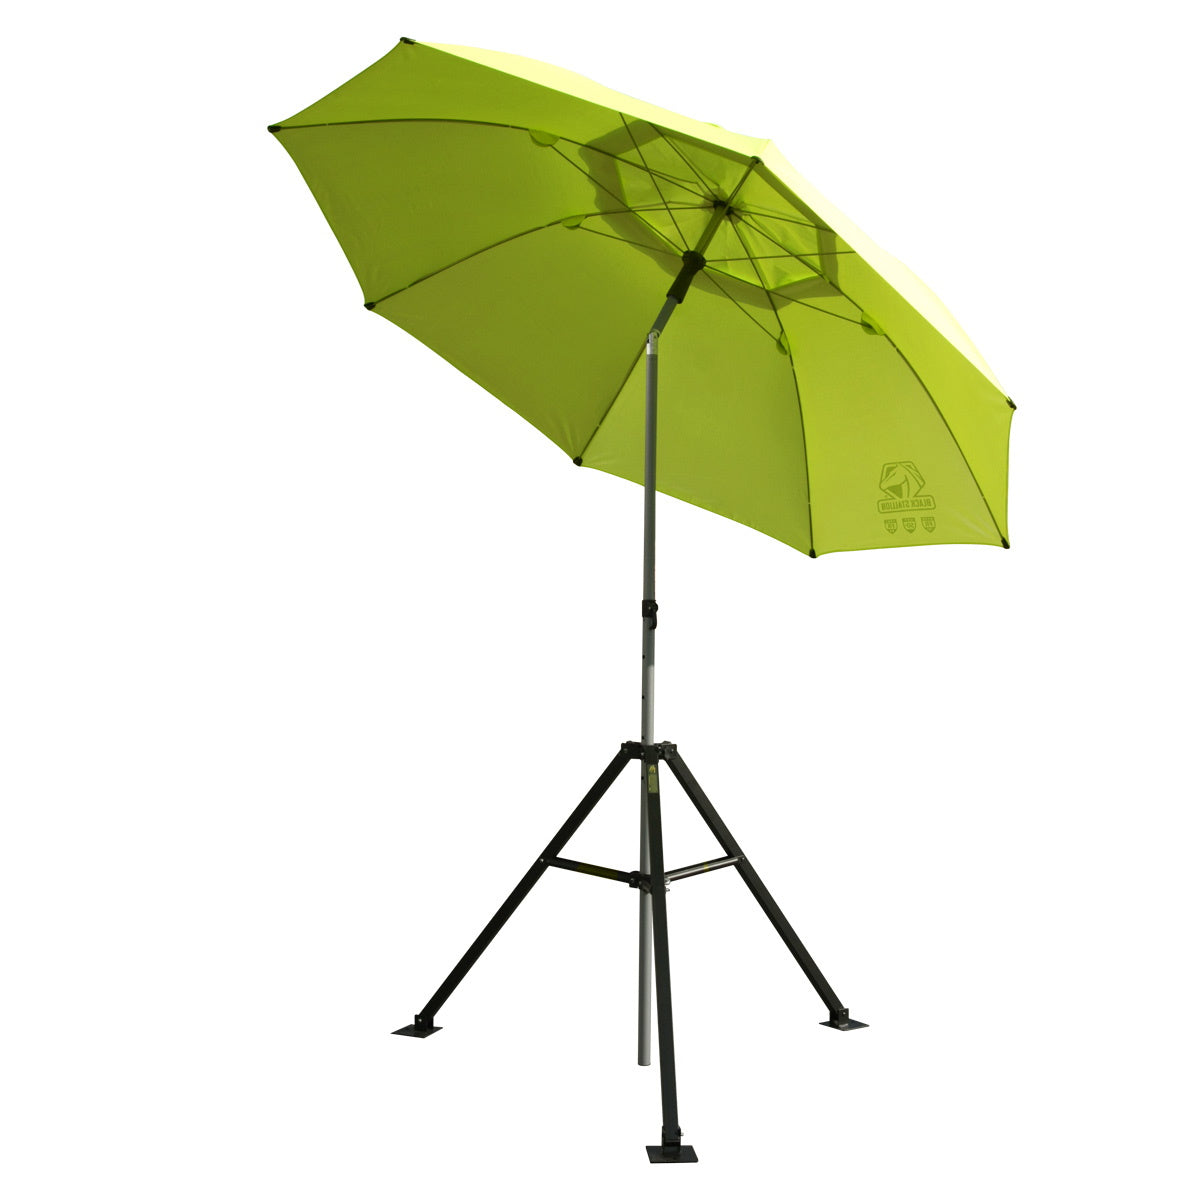 Revco Black Stallion Yellow/Lime FR Industrial Umbrella with Stand (UB250-YEL)